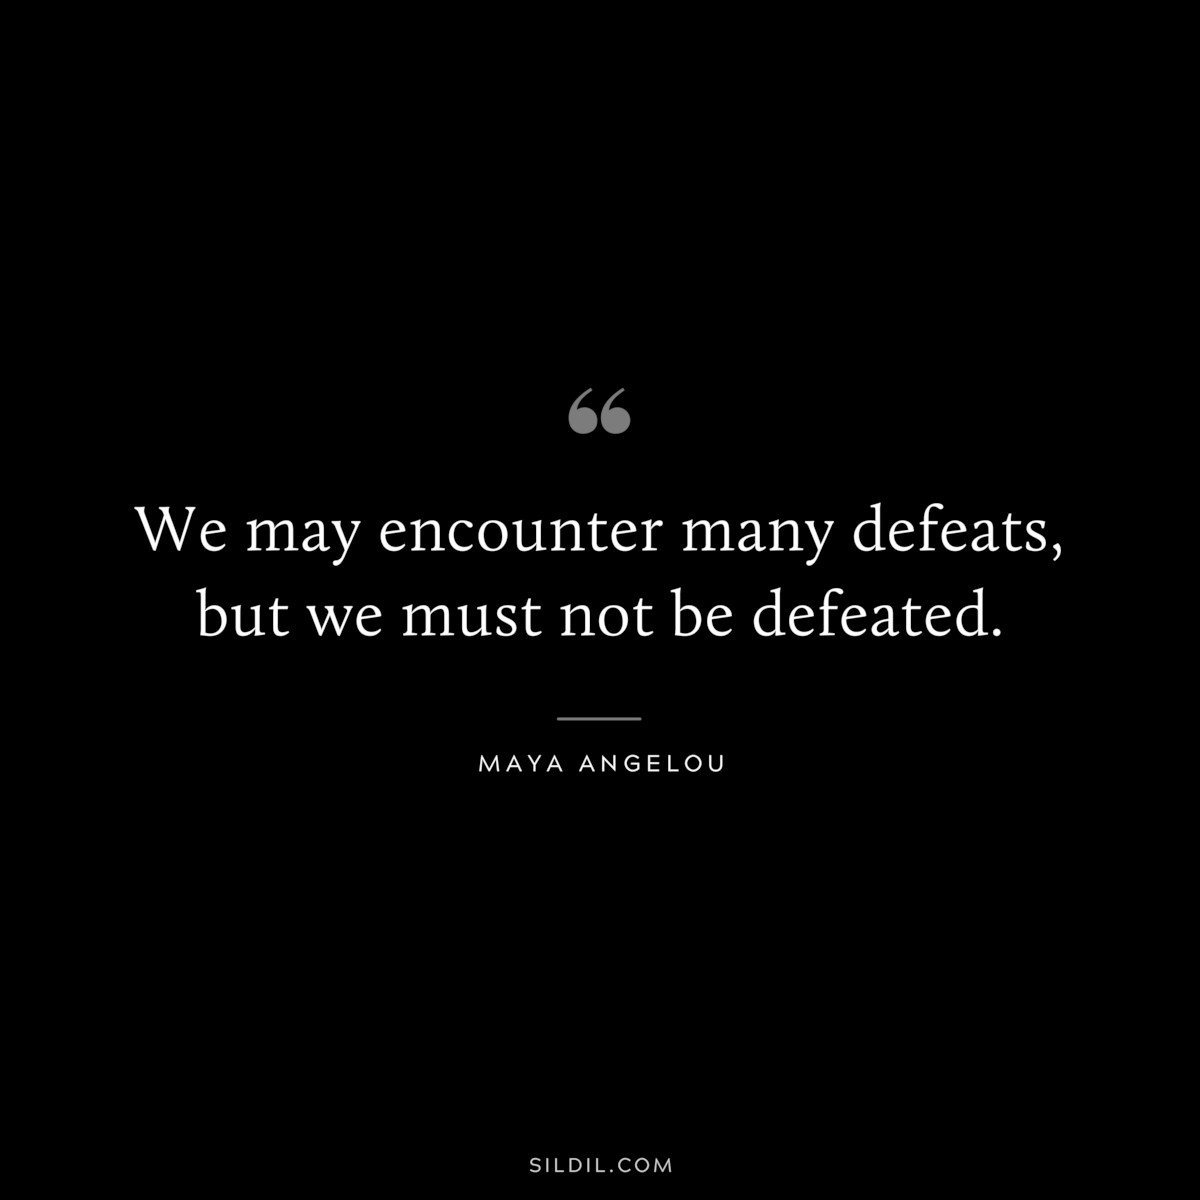 We may encounter many defeats, but we must not be defeated. ― Maya Angelou